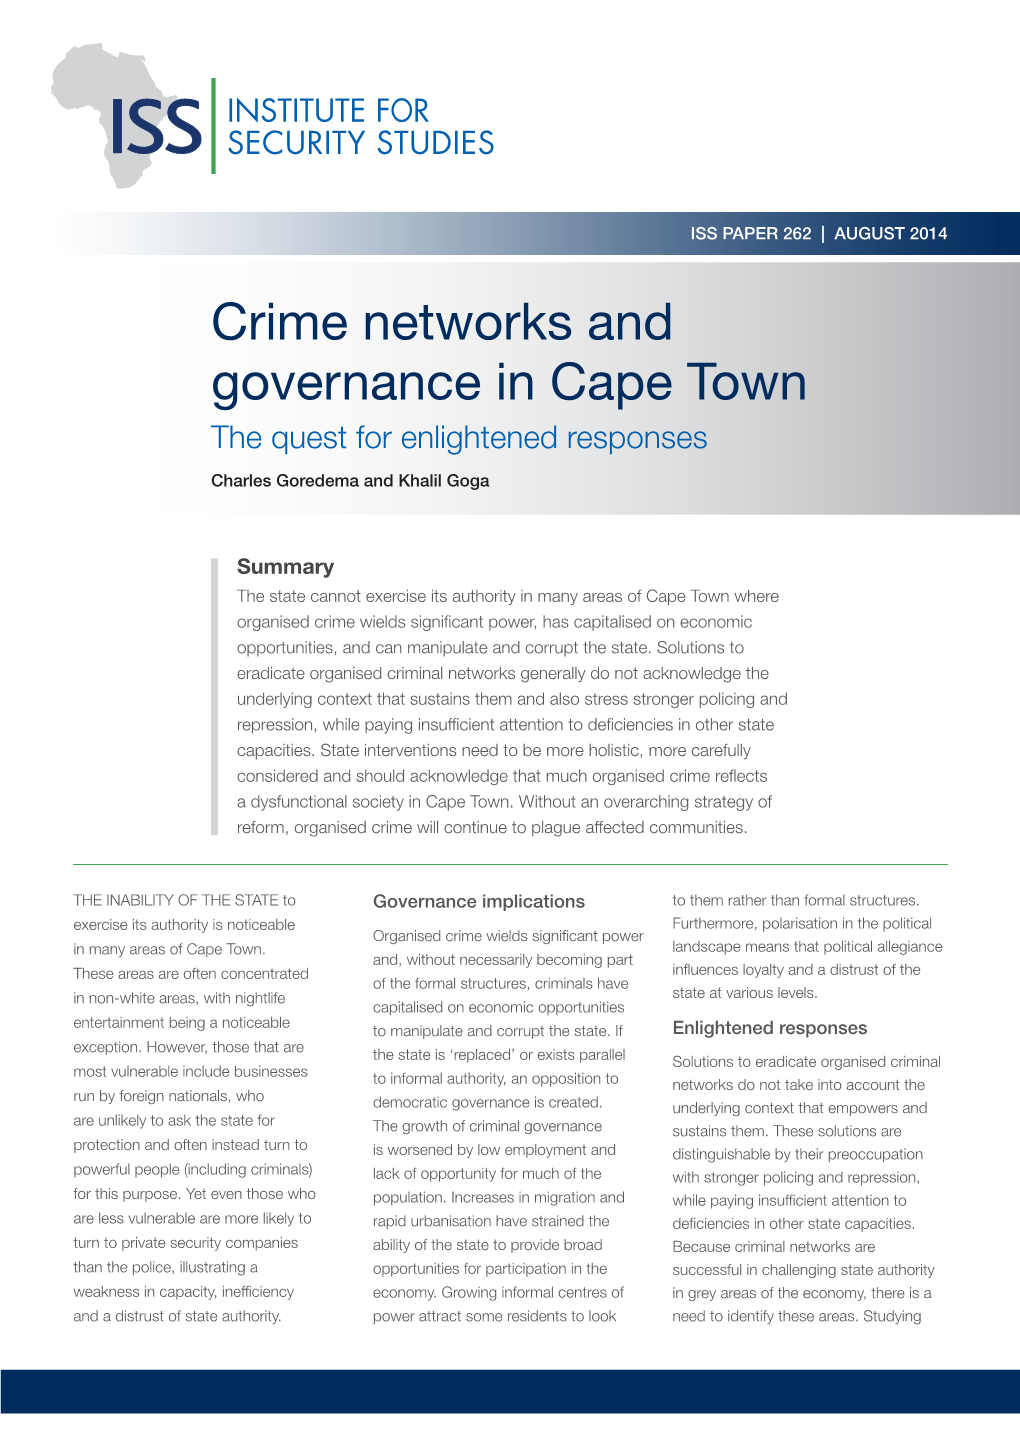 Crime Networks and Governance in Cape Town the Quest for Enlightened Responses